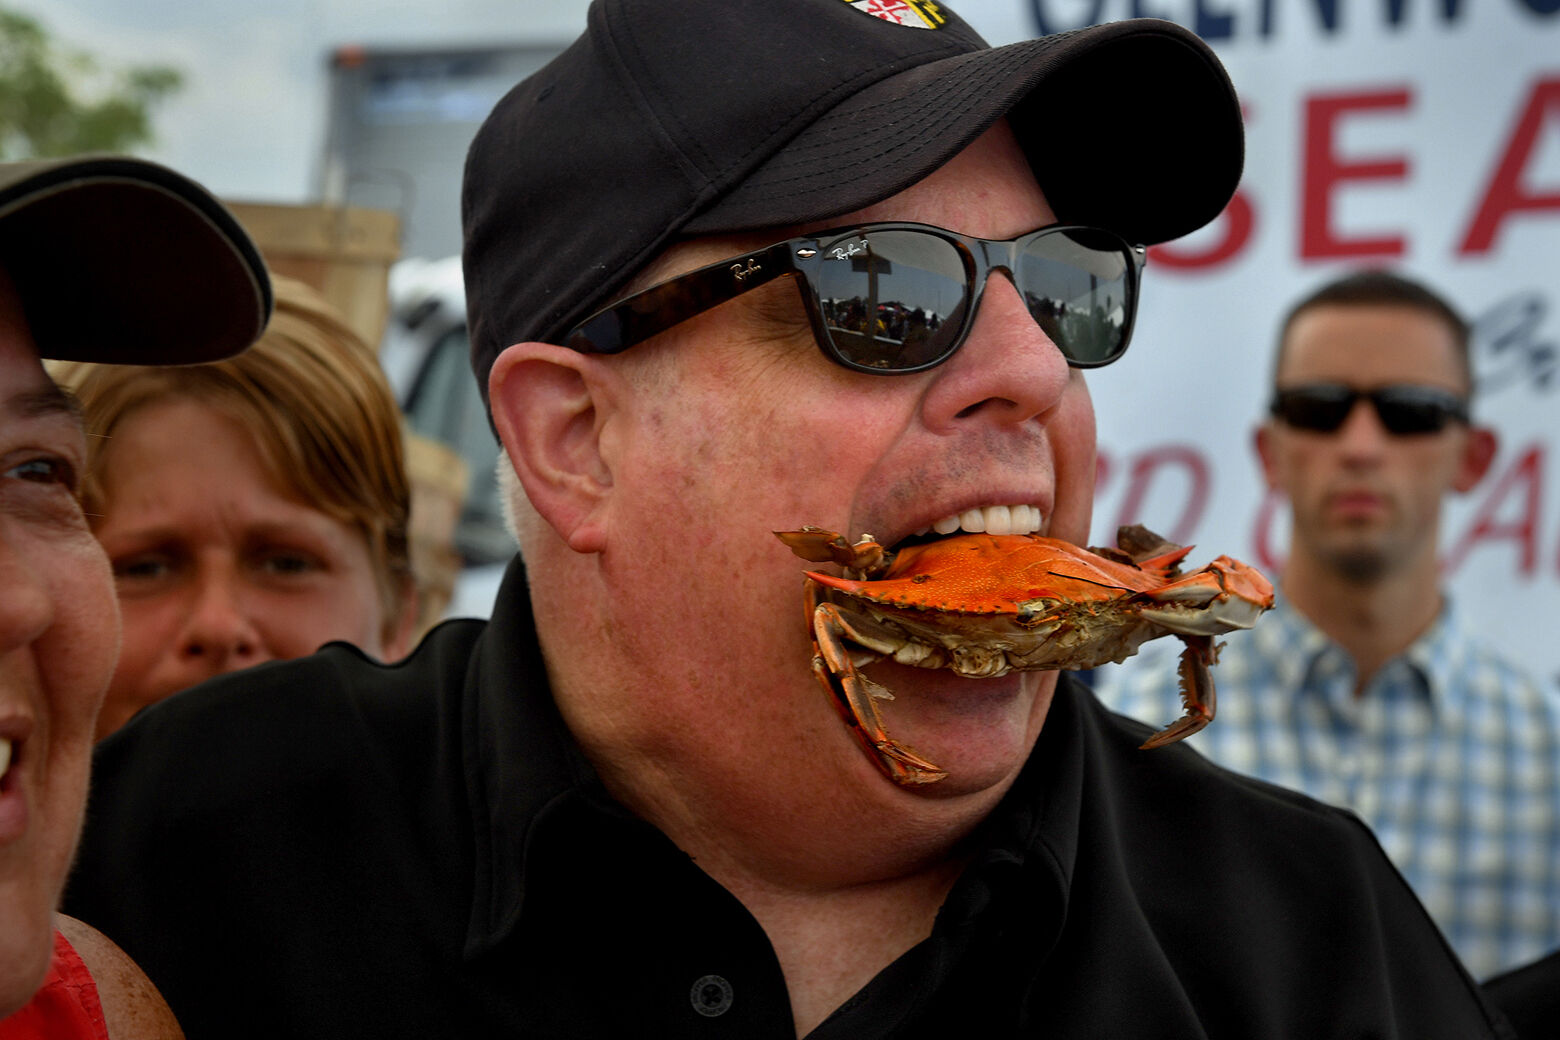 Gov. Hogan with a crab in his mouth.